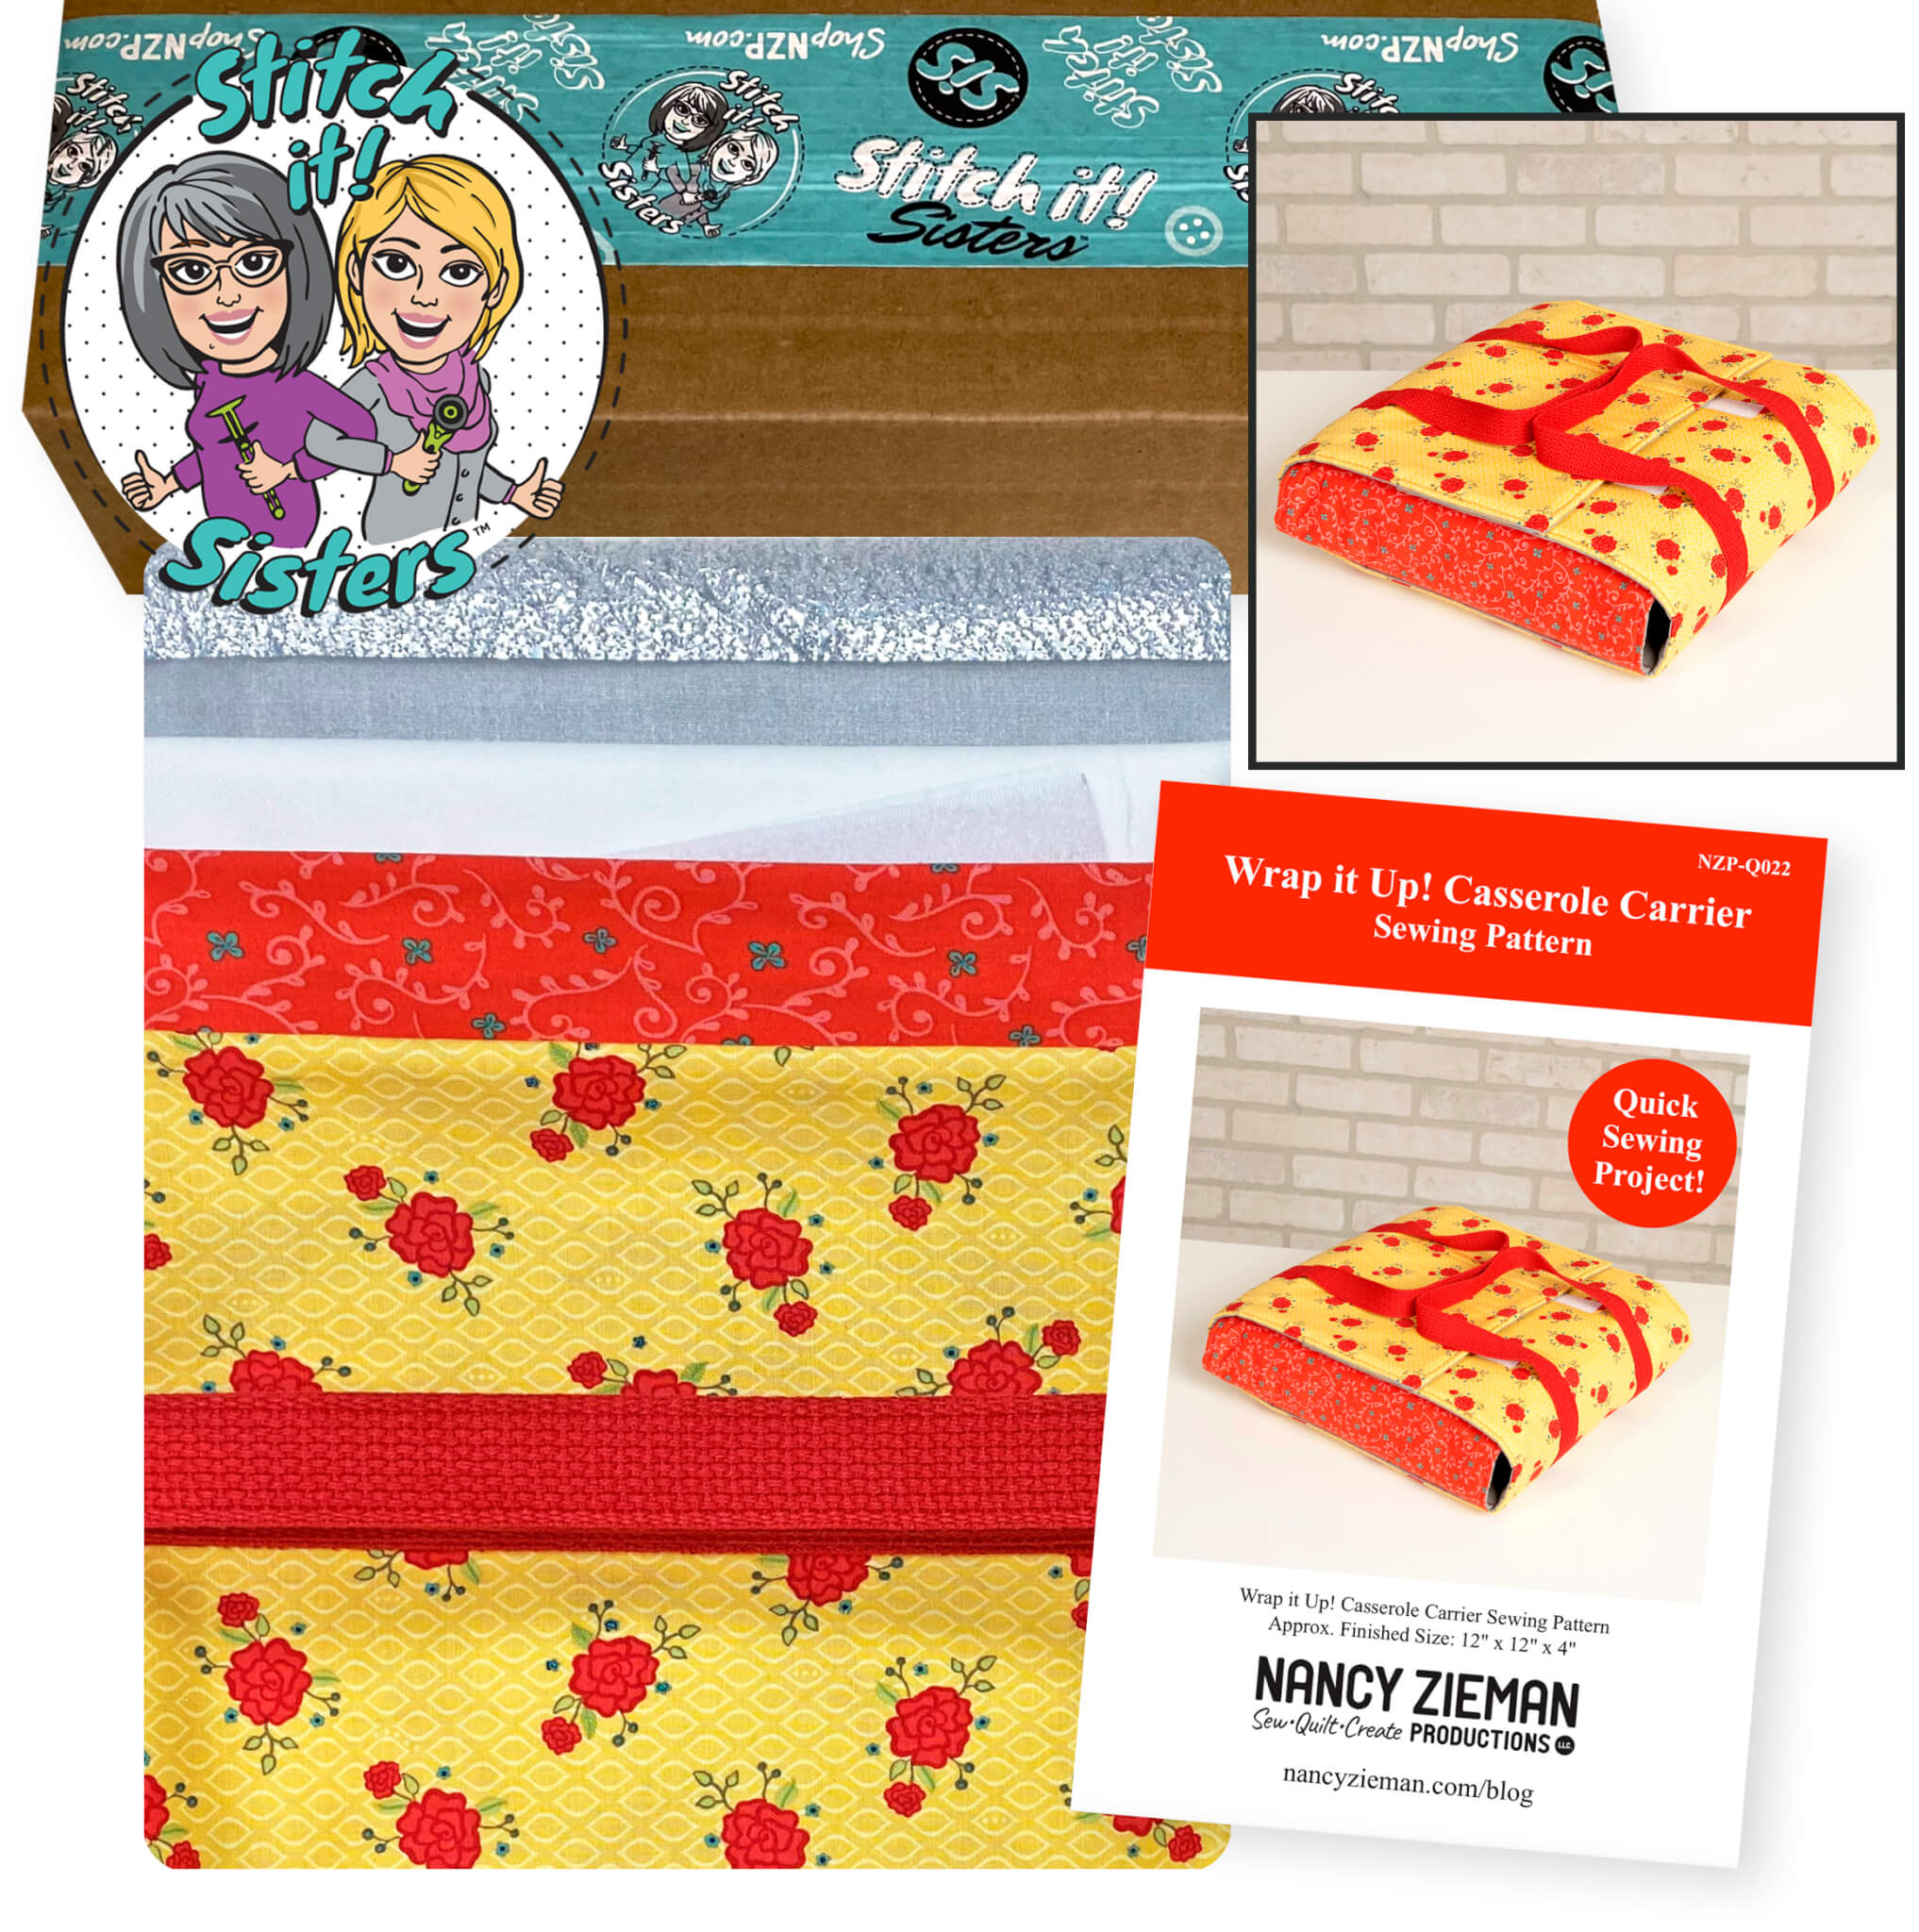 Wrap It Up! Casserole Carrier Sewing Project Bundle Box Kits available at Nancy Zieman Productions at ShopNZP.com